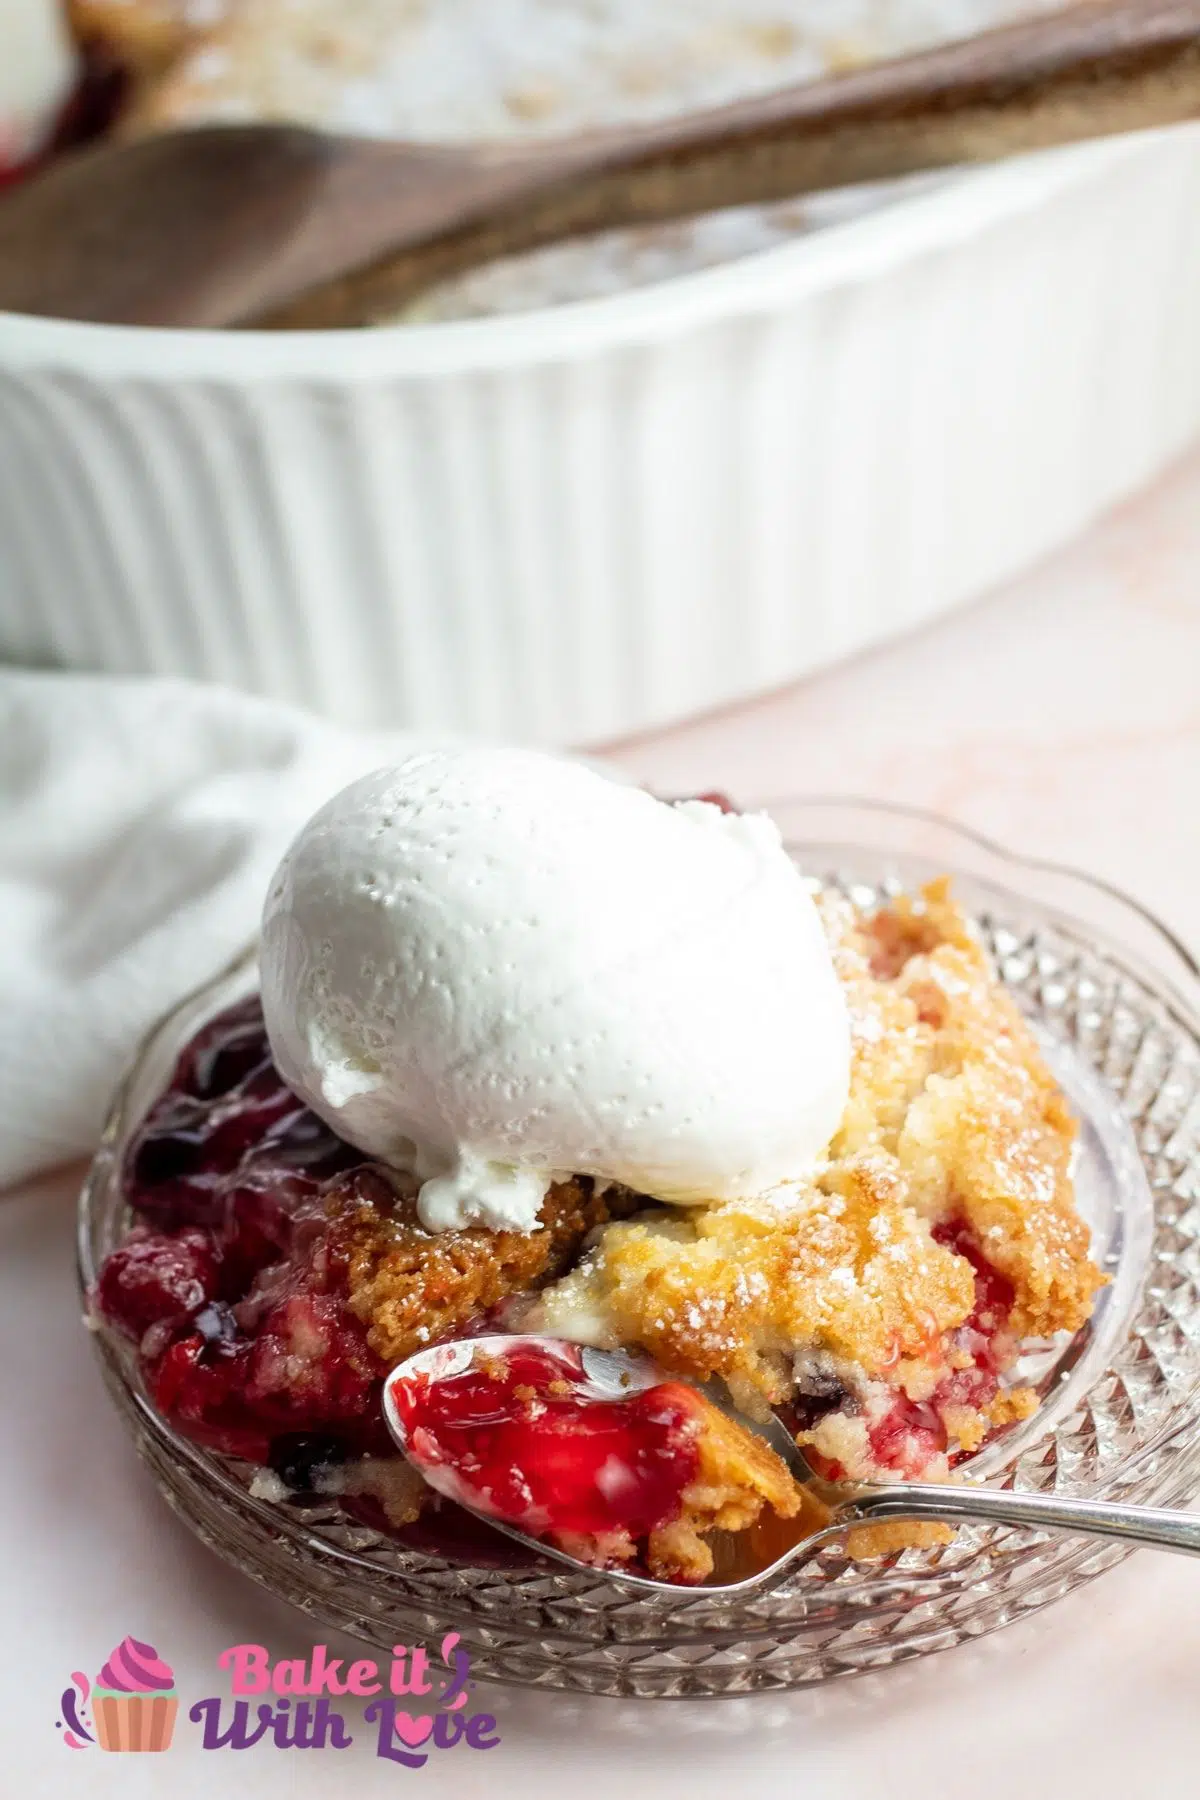 Tall image of the cherry blueberry dump cake served on plate with scoop of vanilla ice cream.